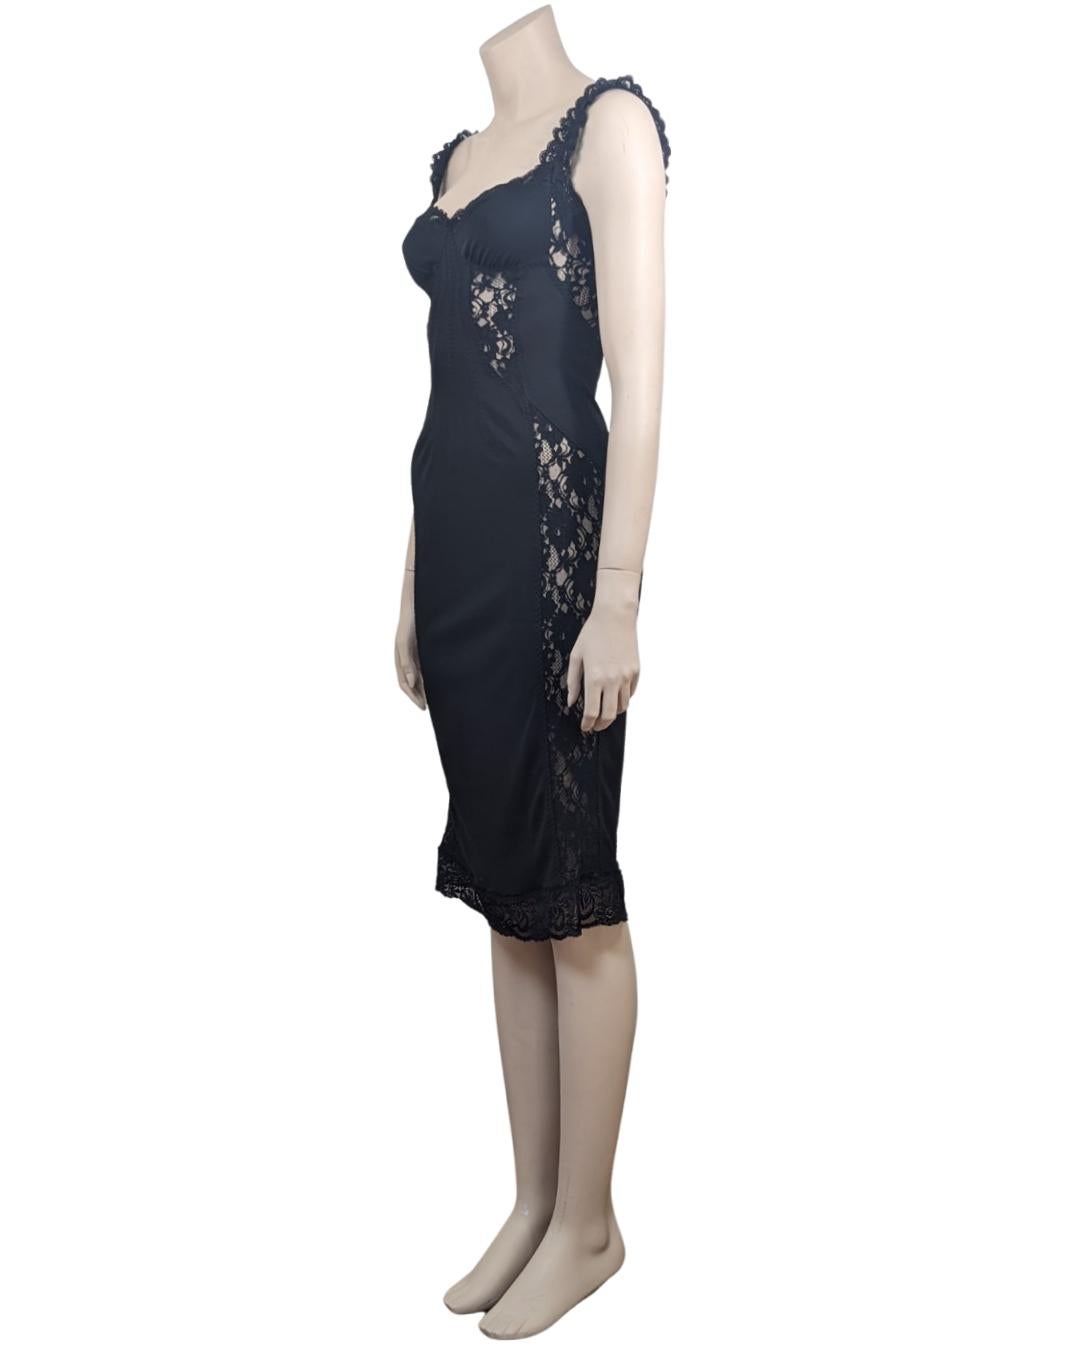 Adorable black dress with Lace insert from the Fall Winter 2003 collection. Exquisite !

· Midi Dress 
· Embellished with floral laces
· Zip on the back
 

Size fits XS to S - cup A or B max

Flat measurements :

Breast : 39 cm
Waist : 31 cm
Hips :